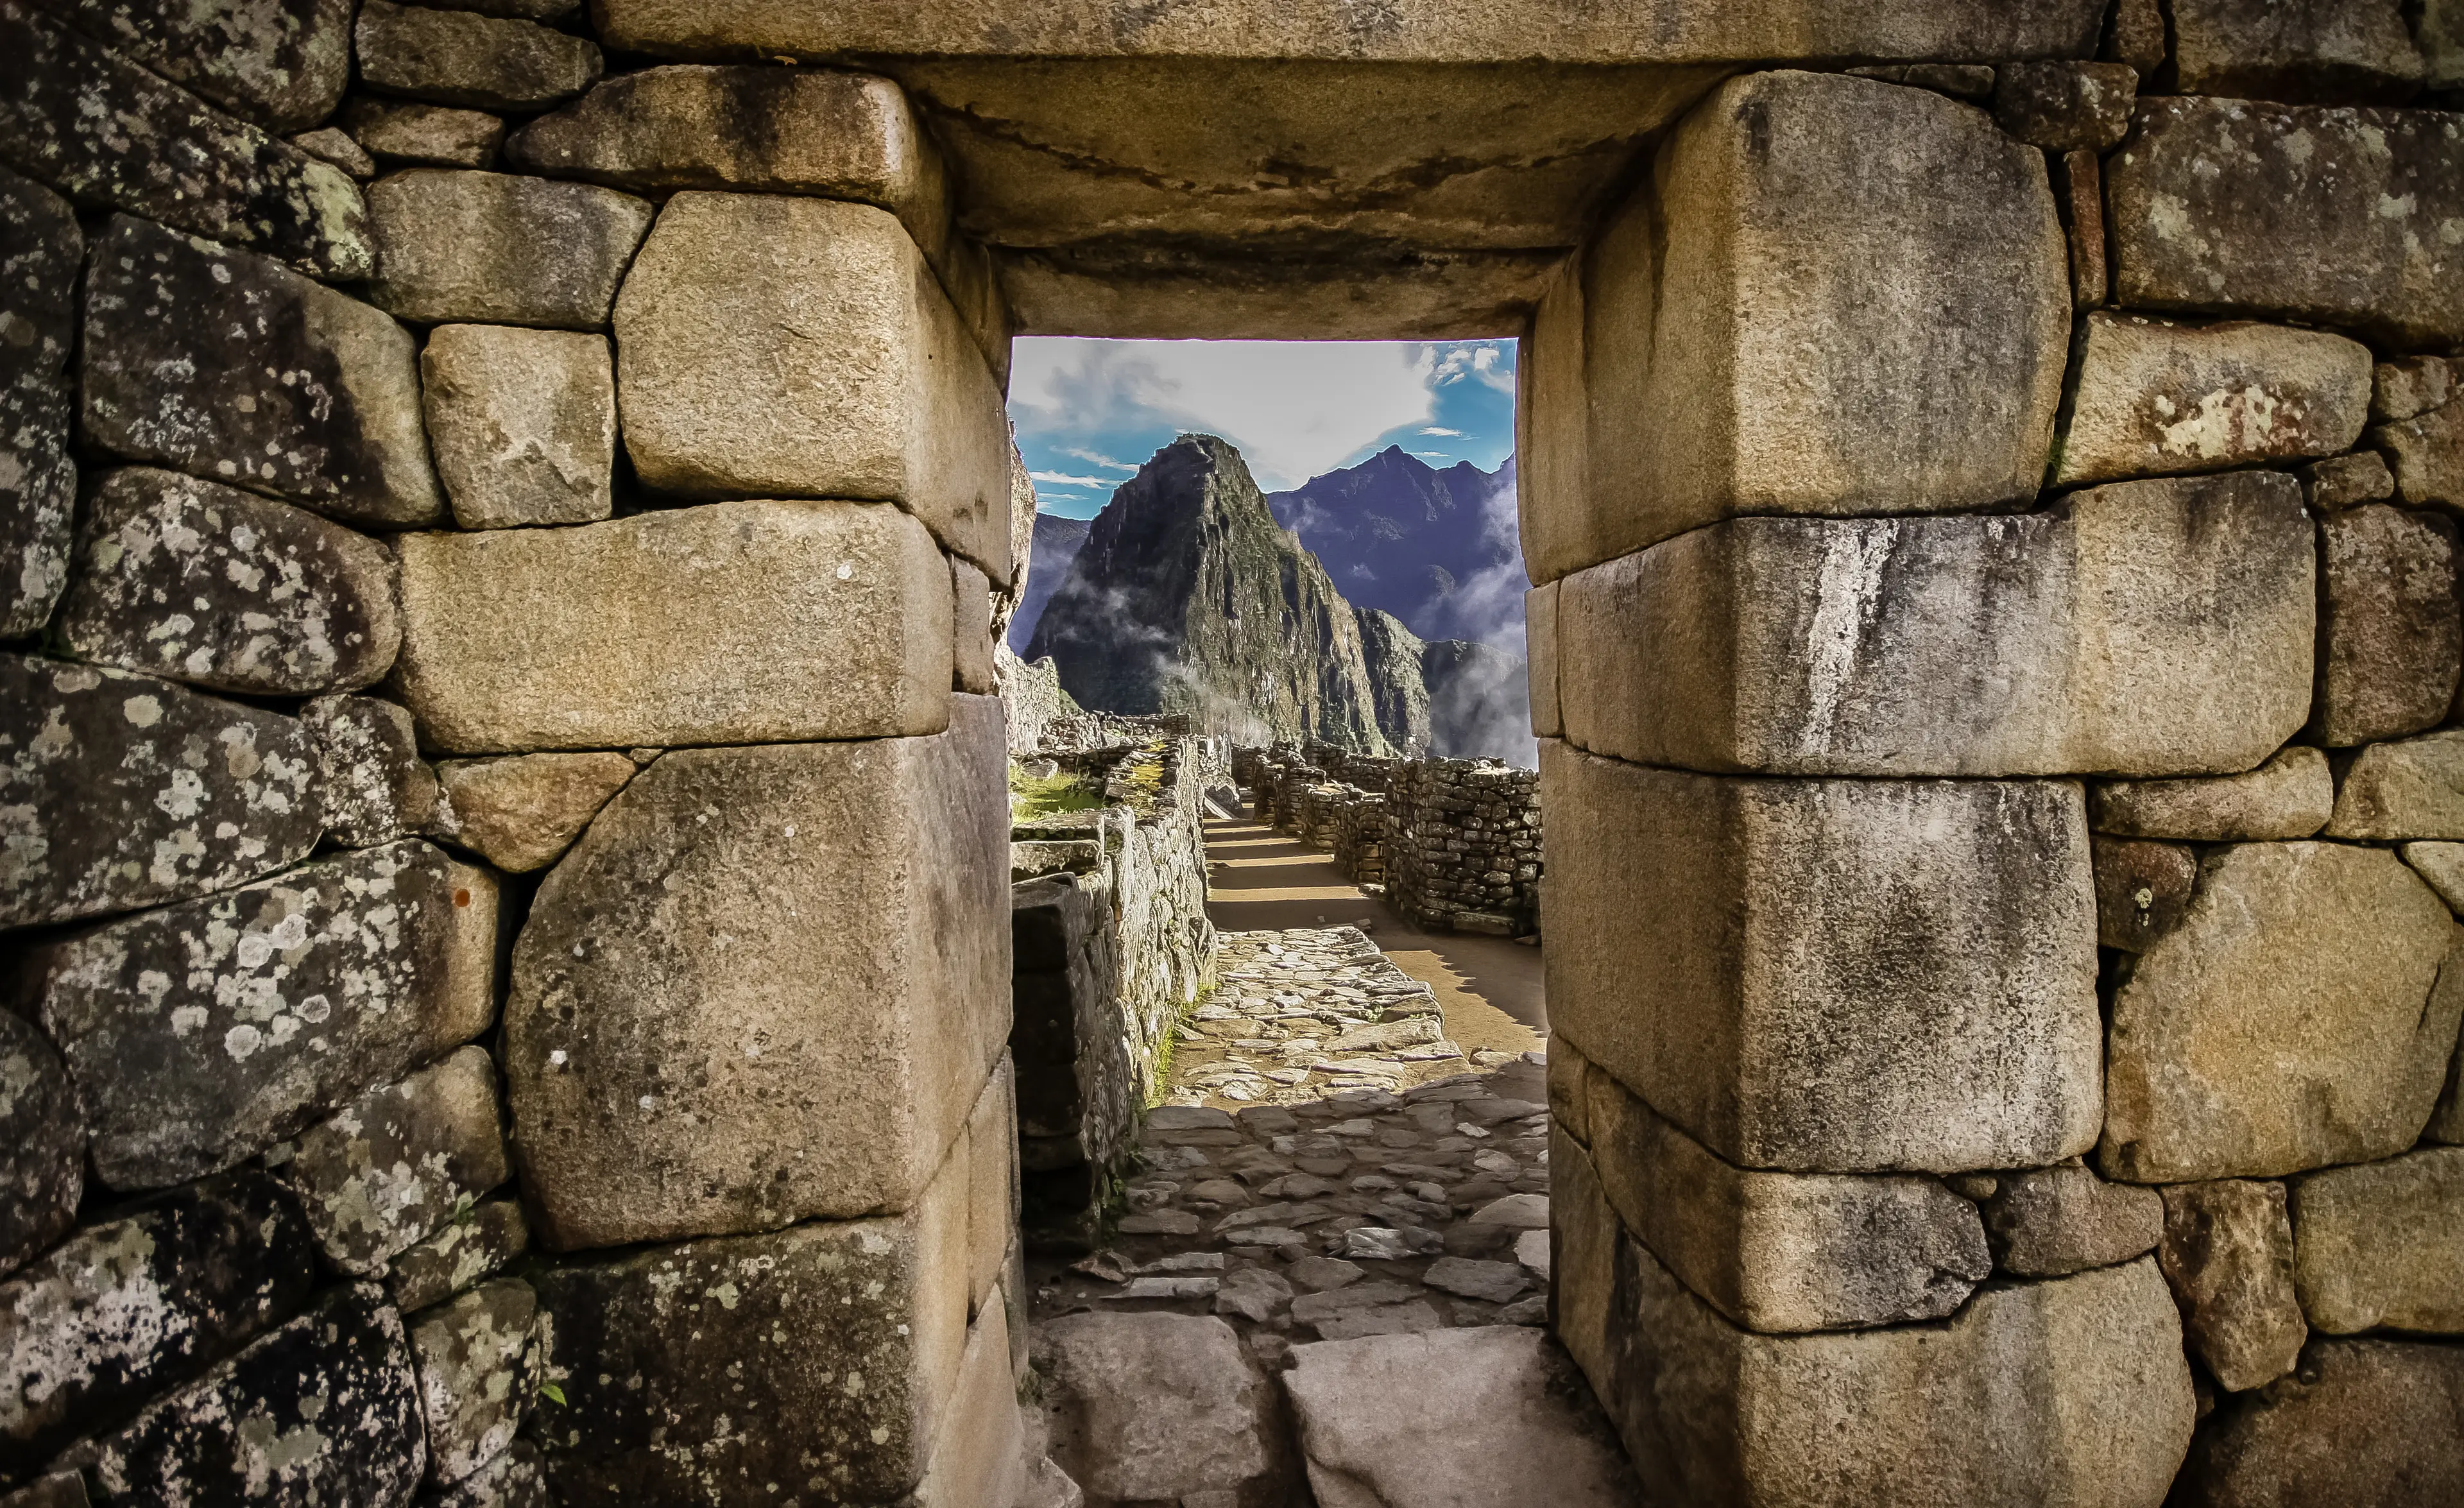 2-Day Machu Picchu Local Experience: Food, Wine, and Sightseeing with Friends